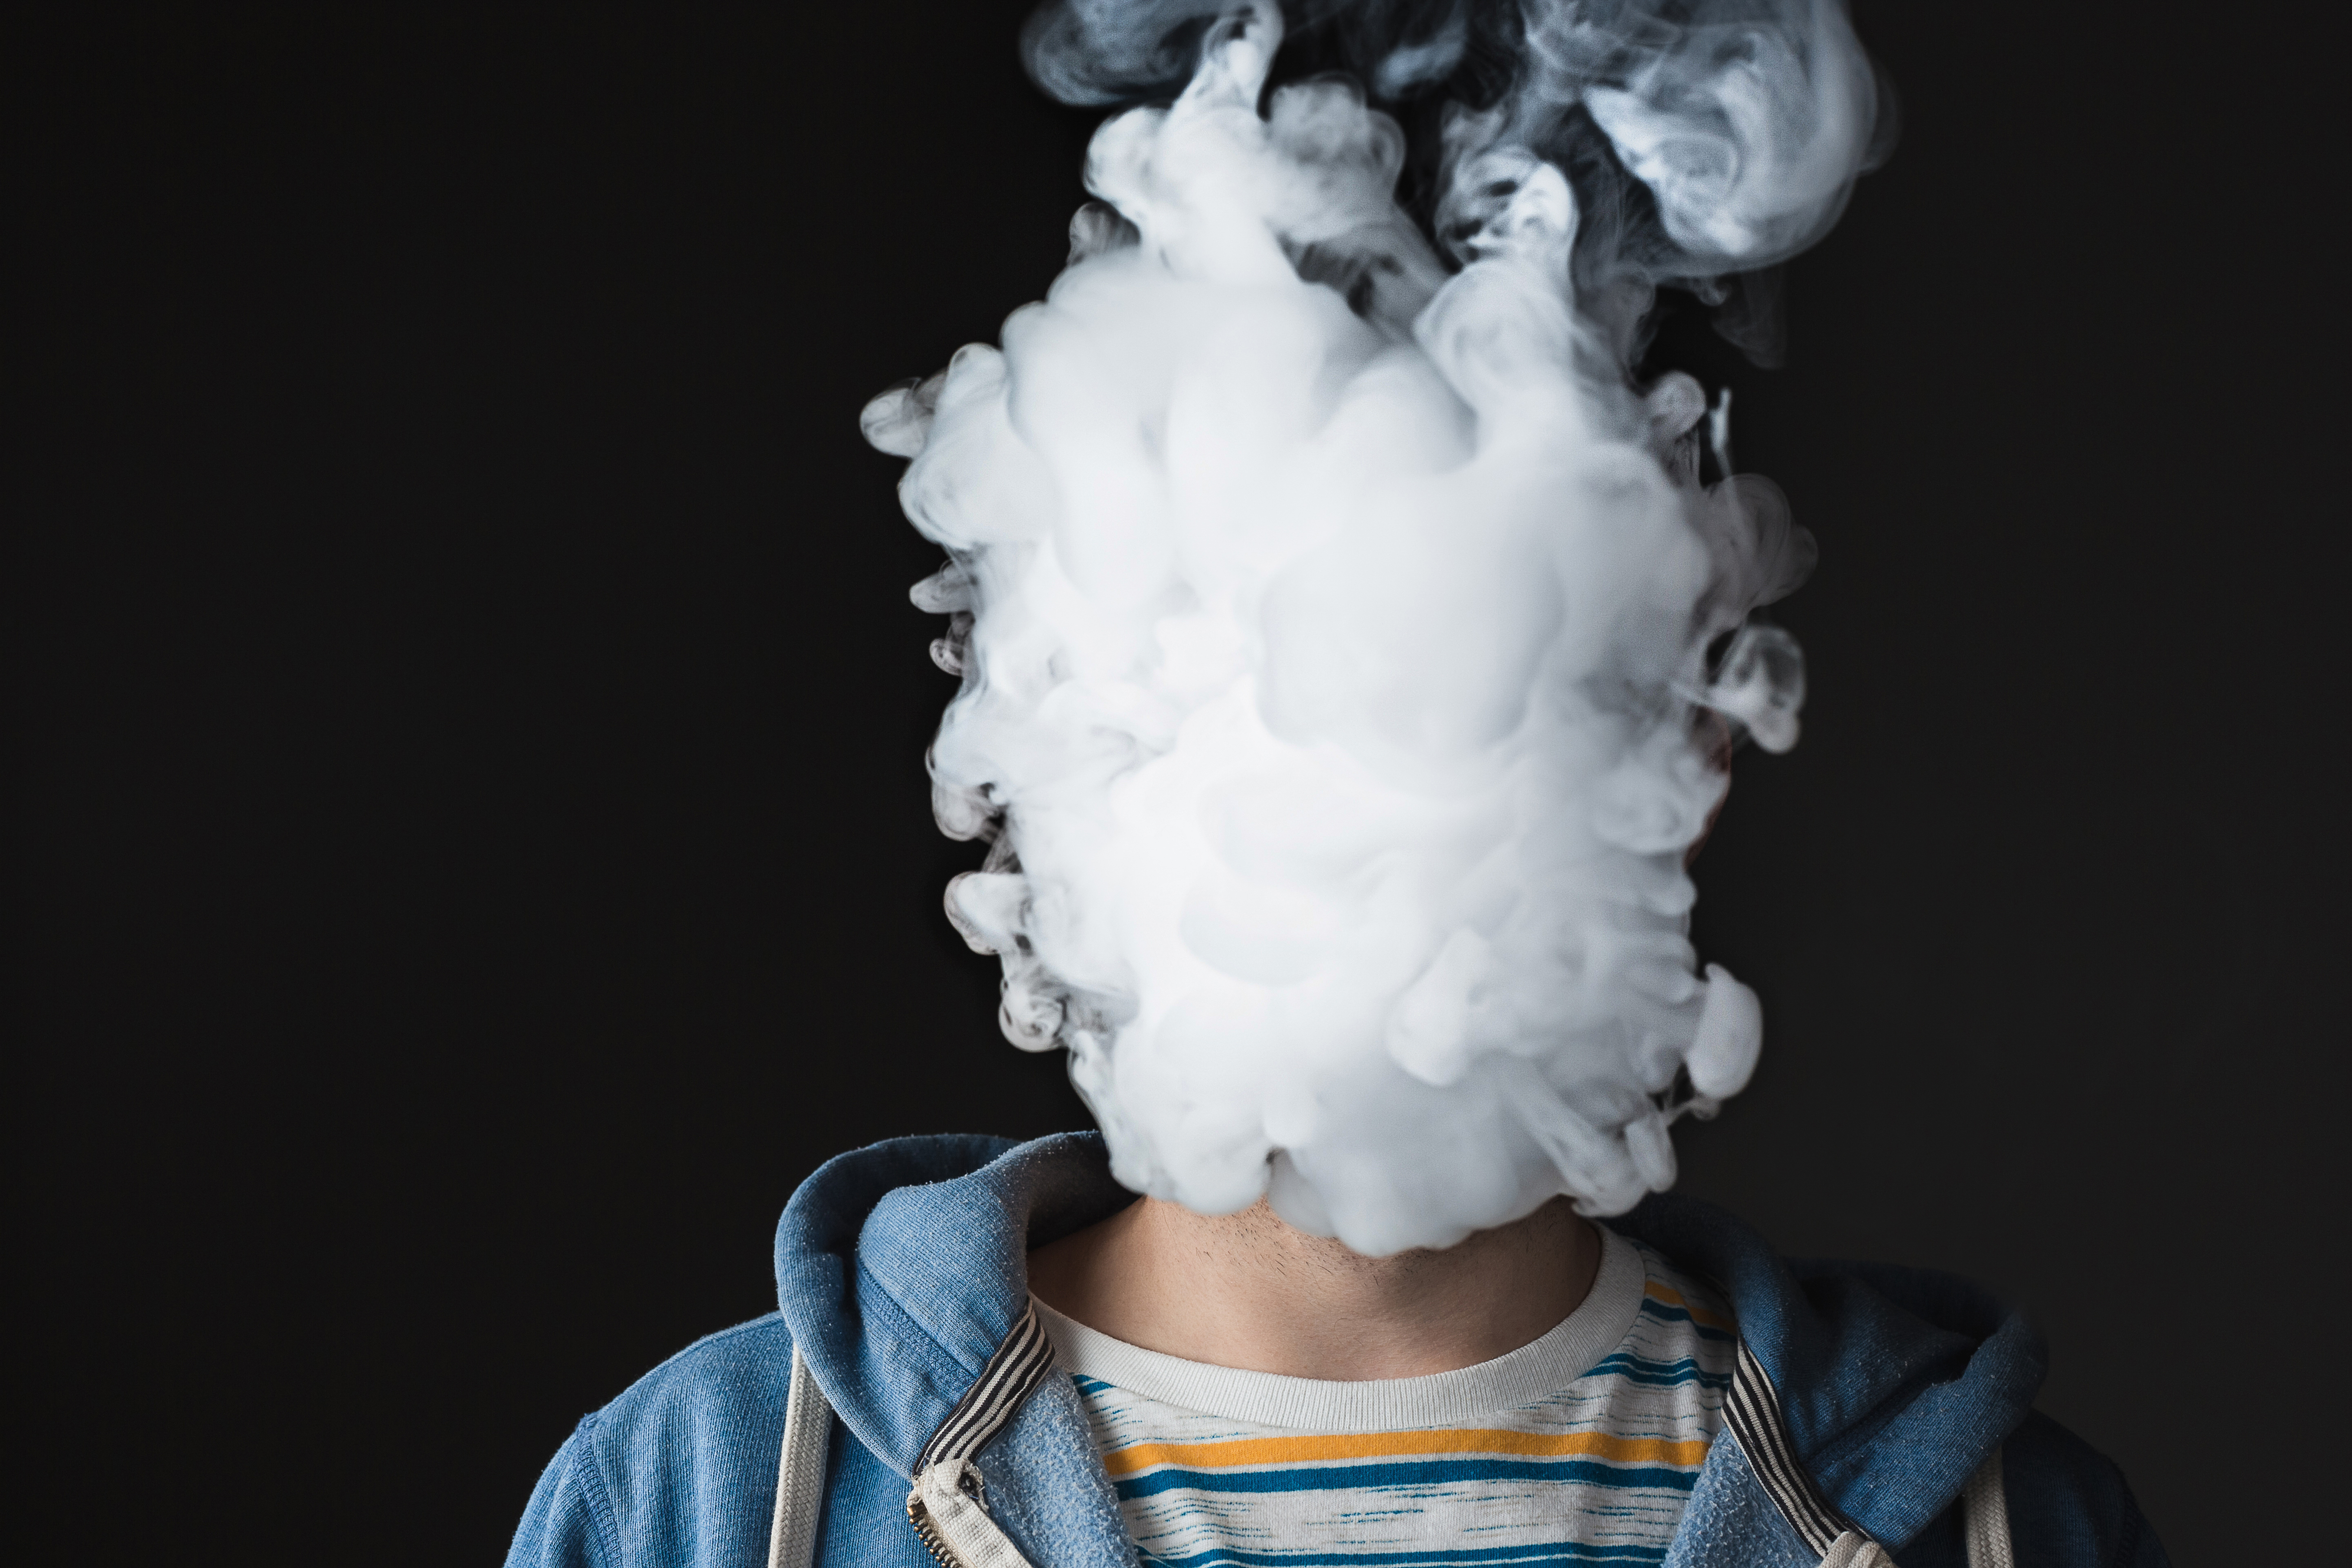 The great vape debate: are e-cigarettes saving smokers or creating